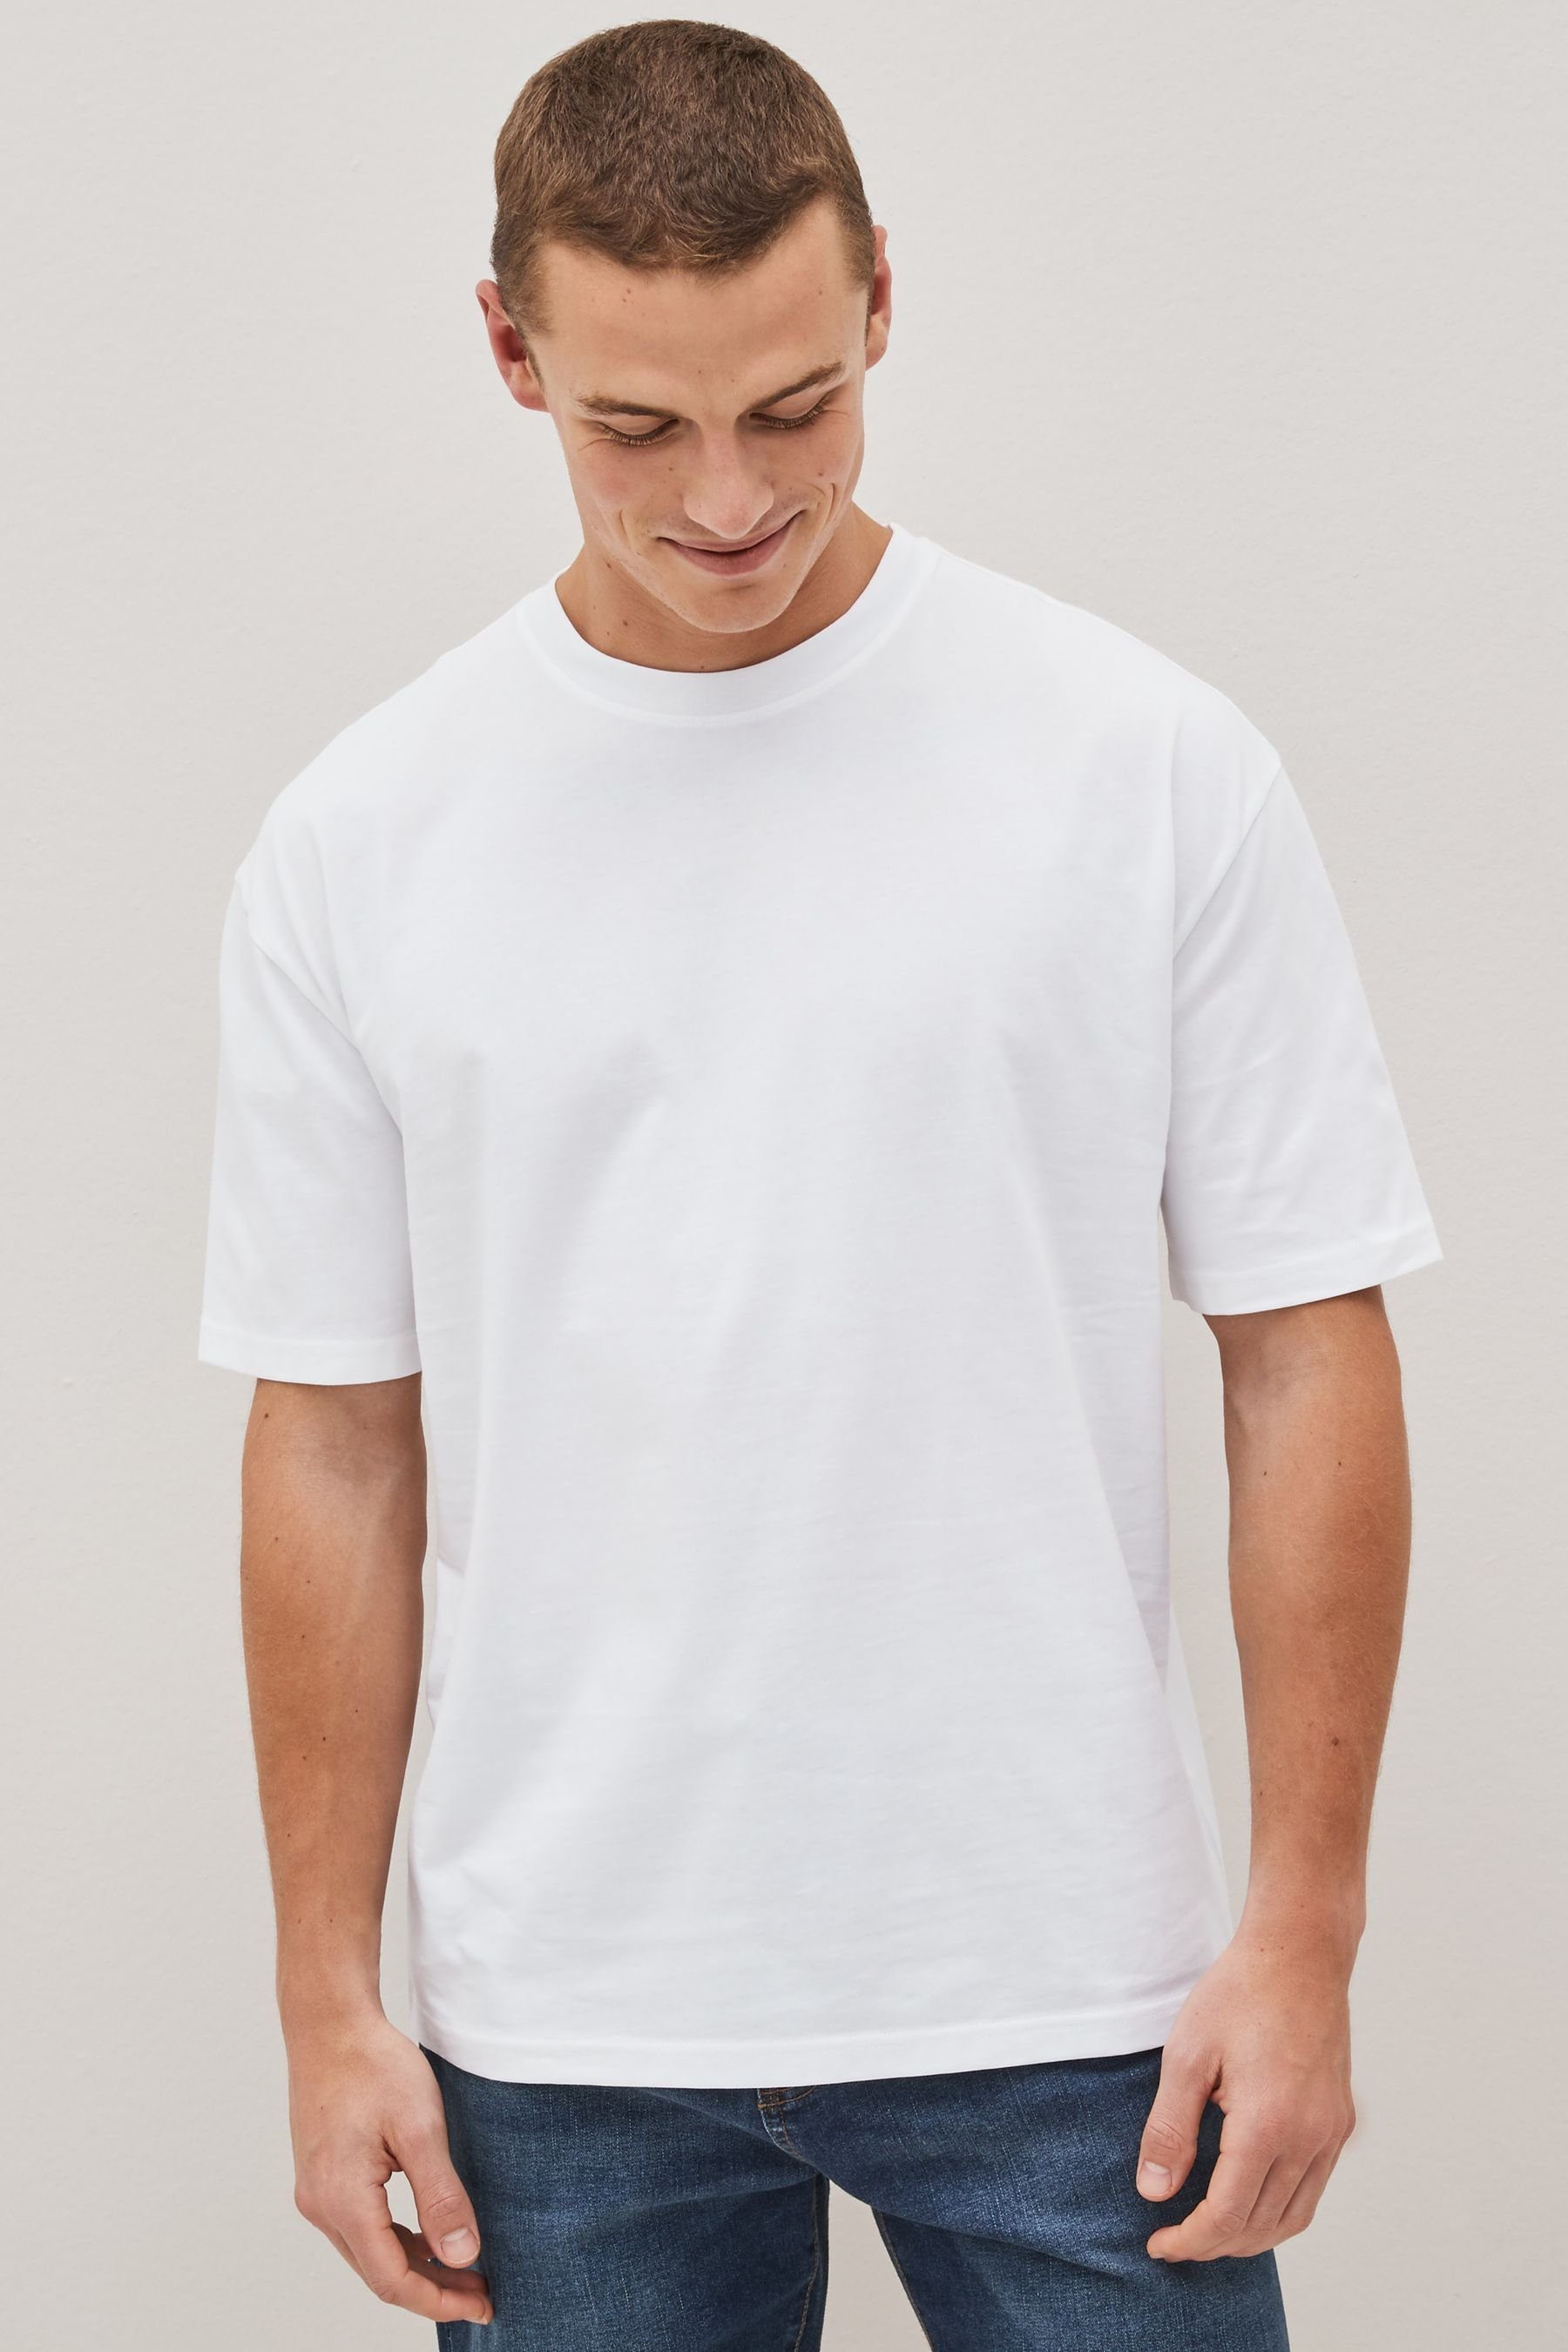 Next Rundhals-T-Shirt Fit Relaxed im White T-Shirt (1-tlg)